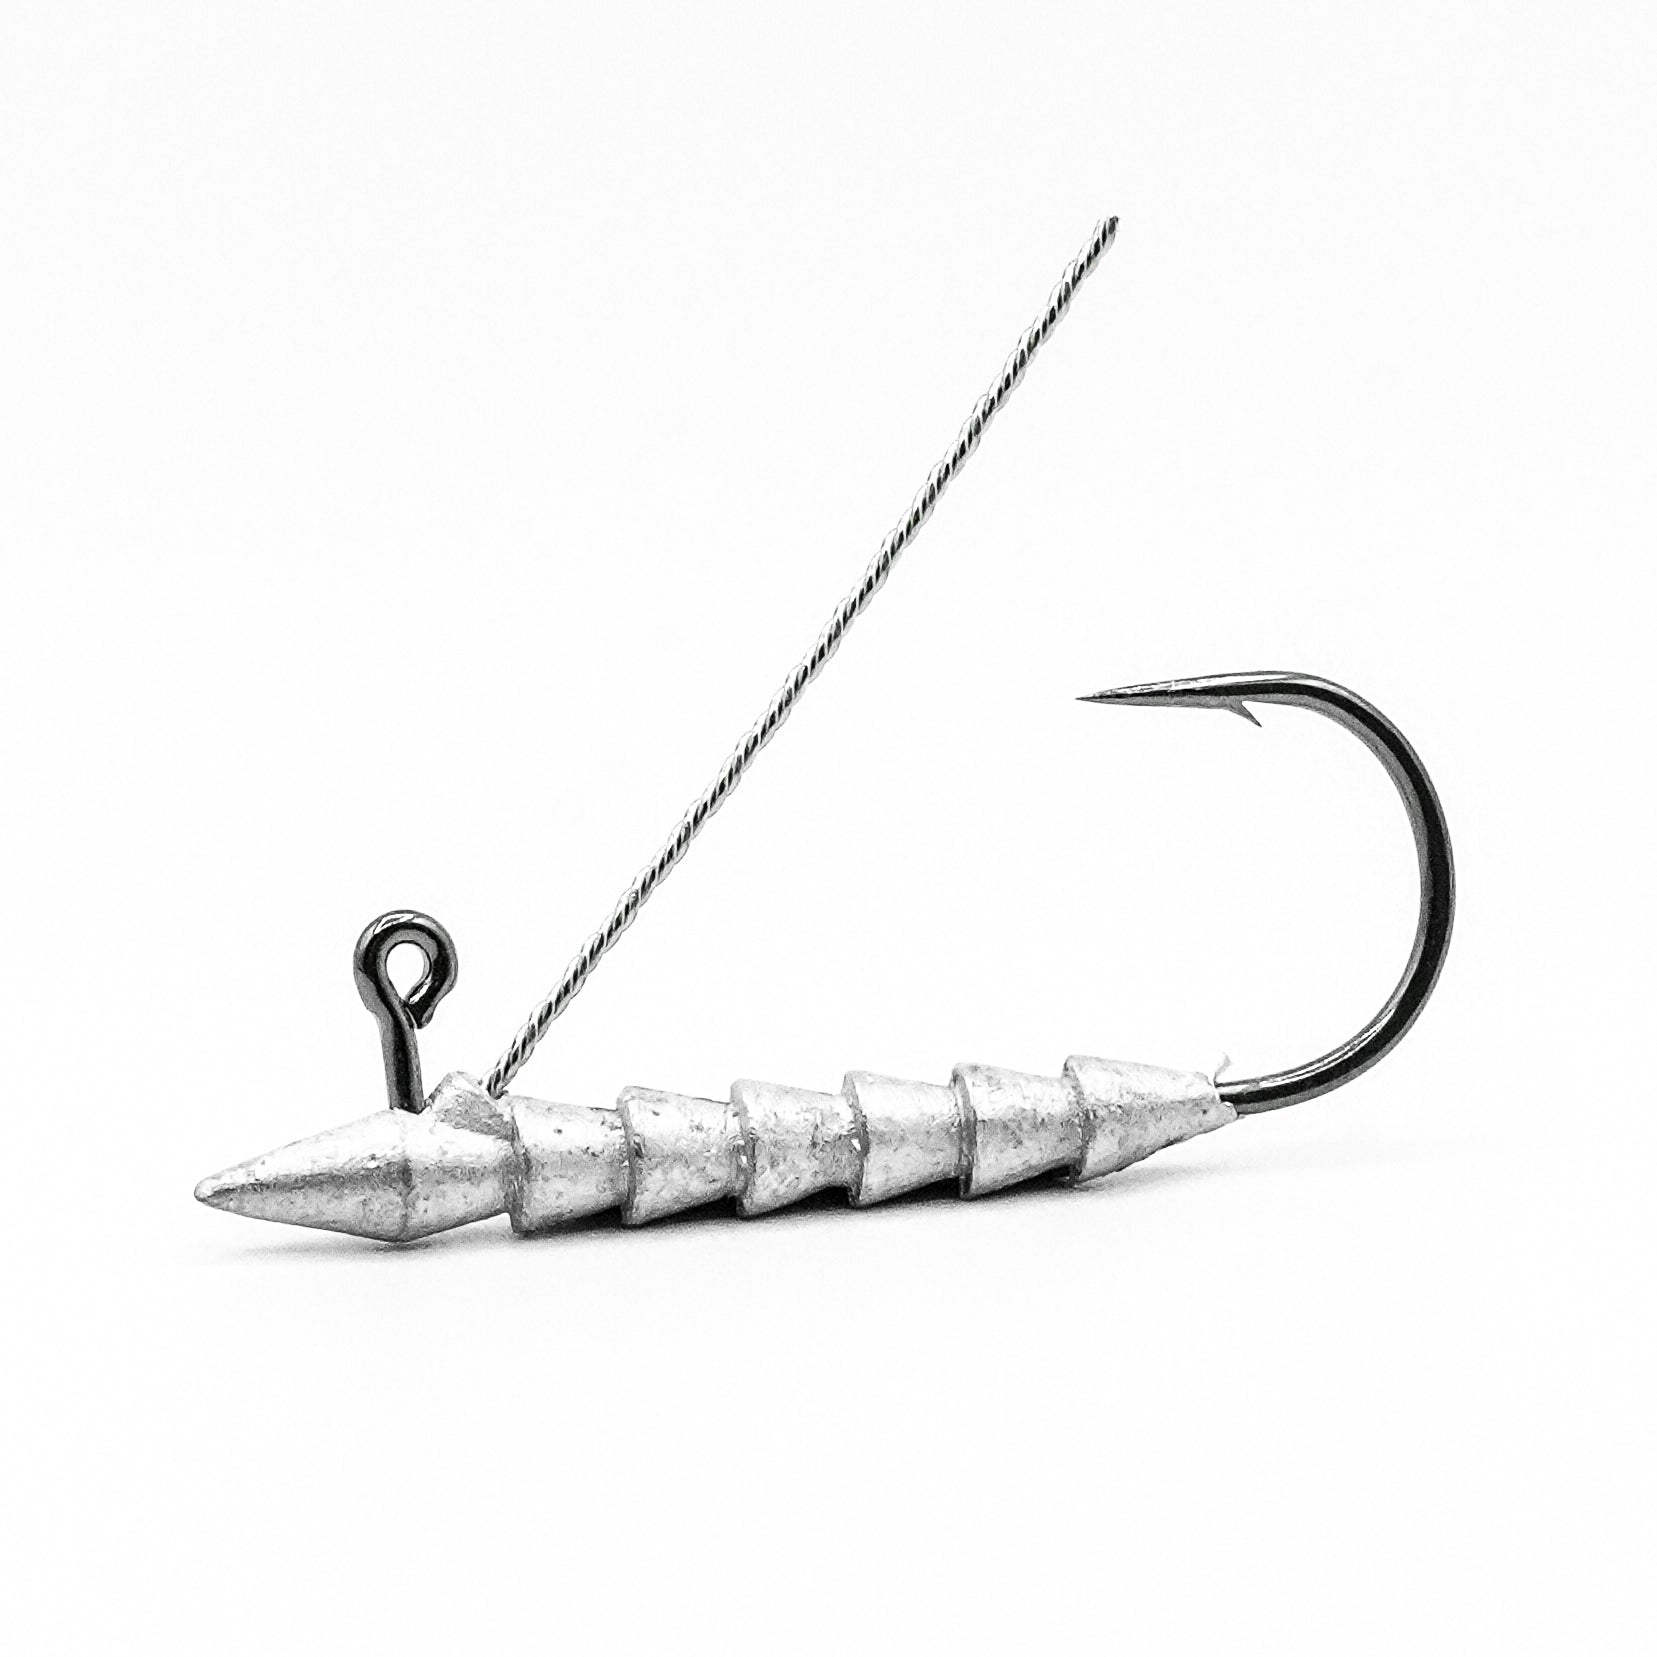 Introducing the Core Tackle Ozark Rig 